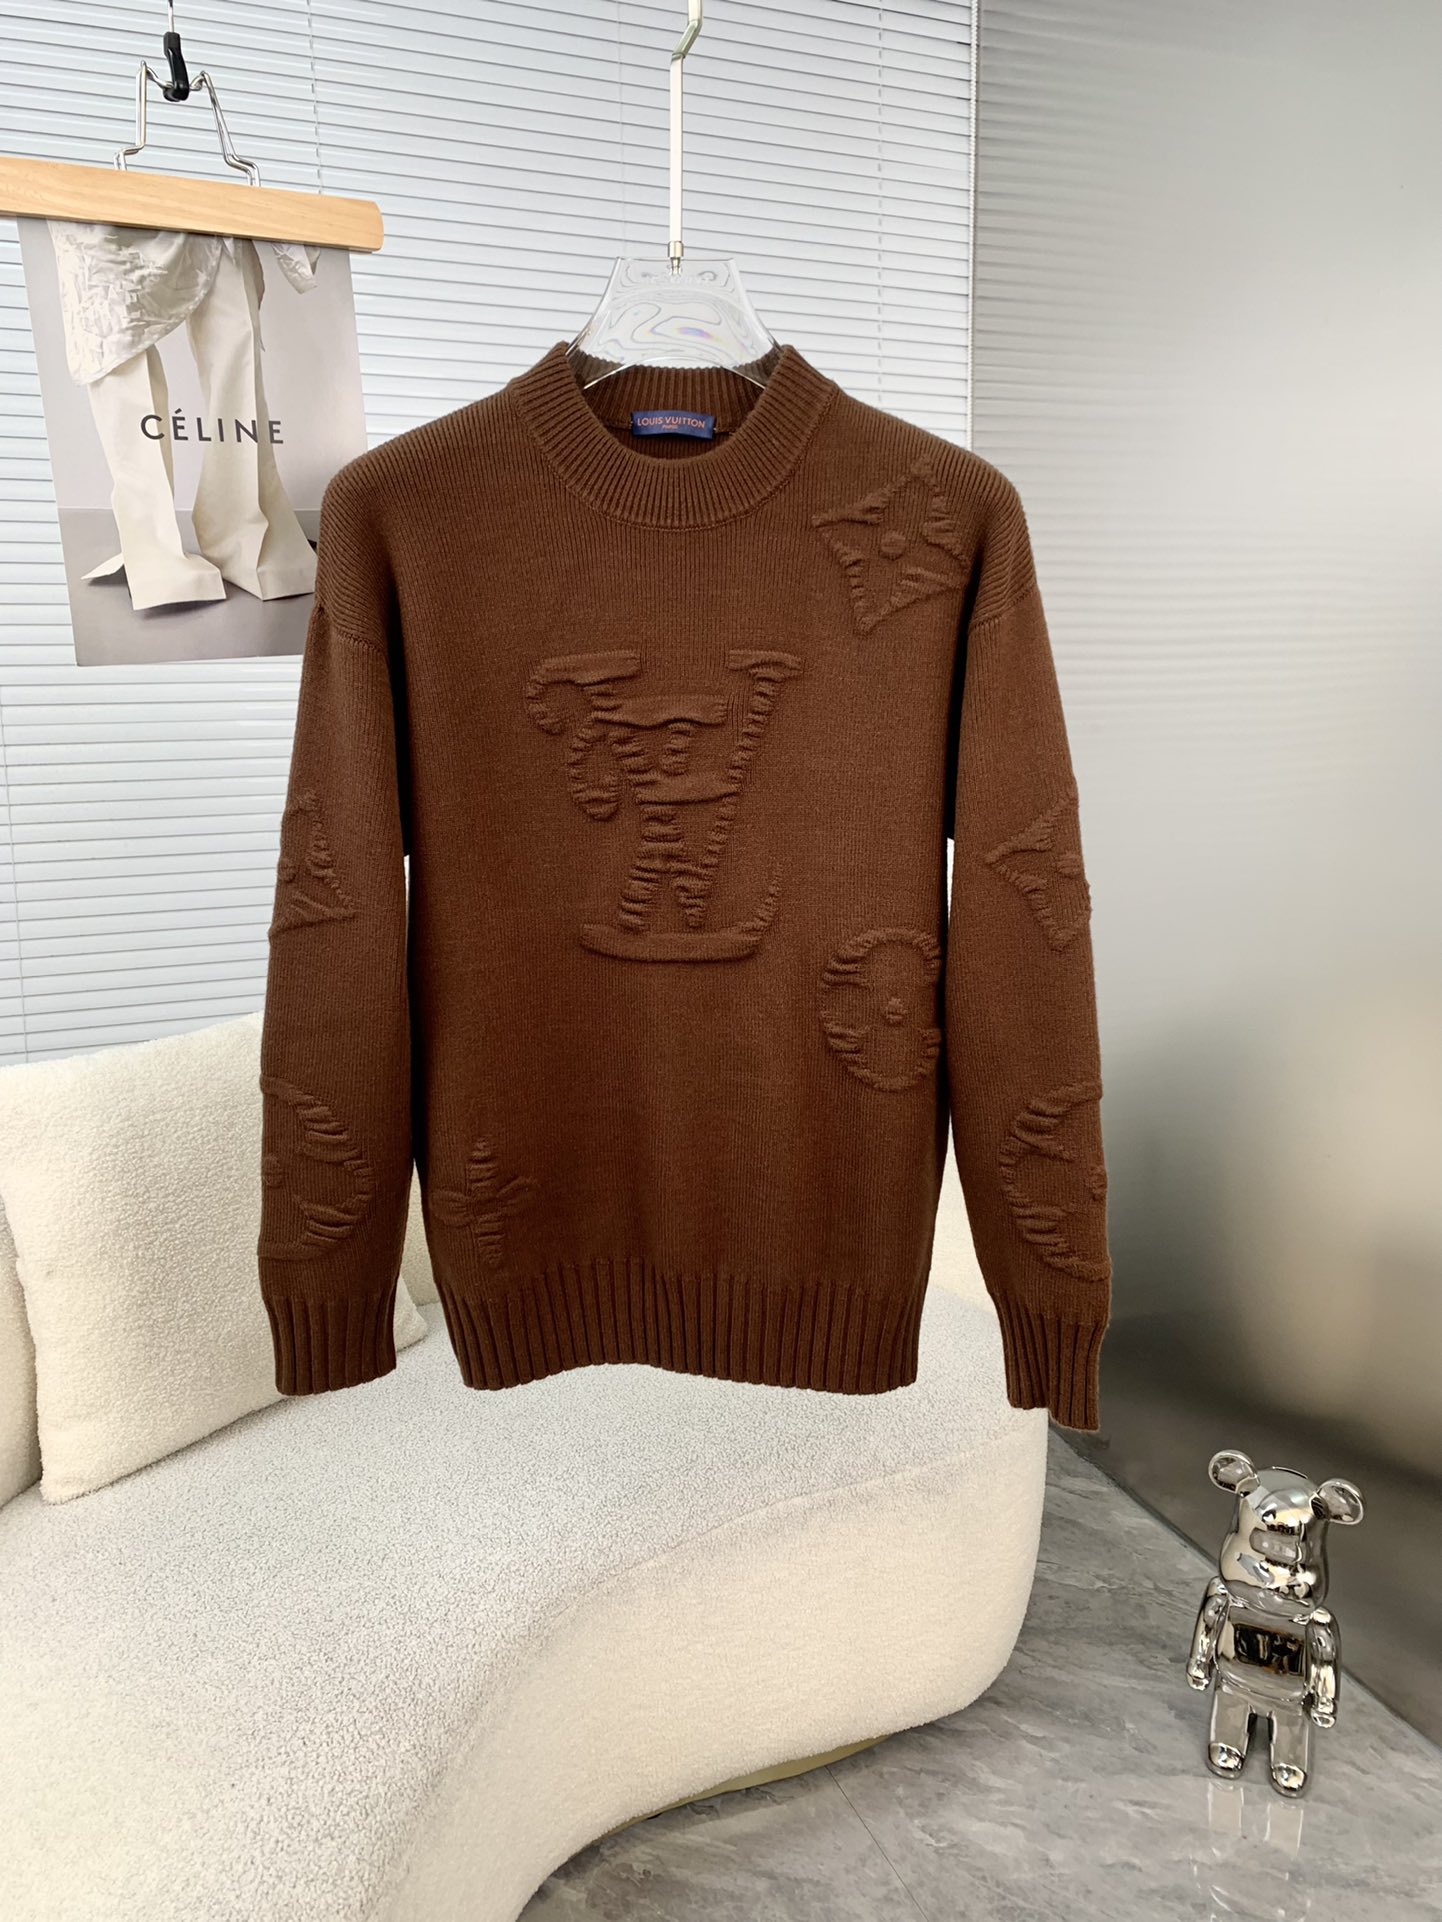 Louis Vuitton Best
 Clothing Sweatshirts Black Coffee Color White Fall/Winter Collection